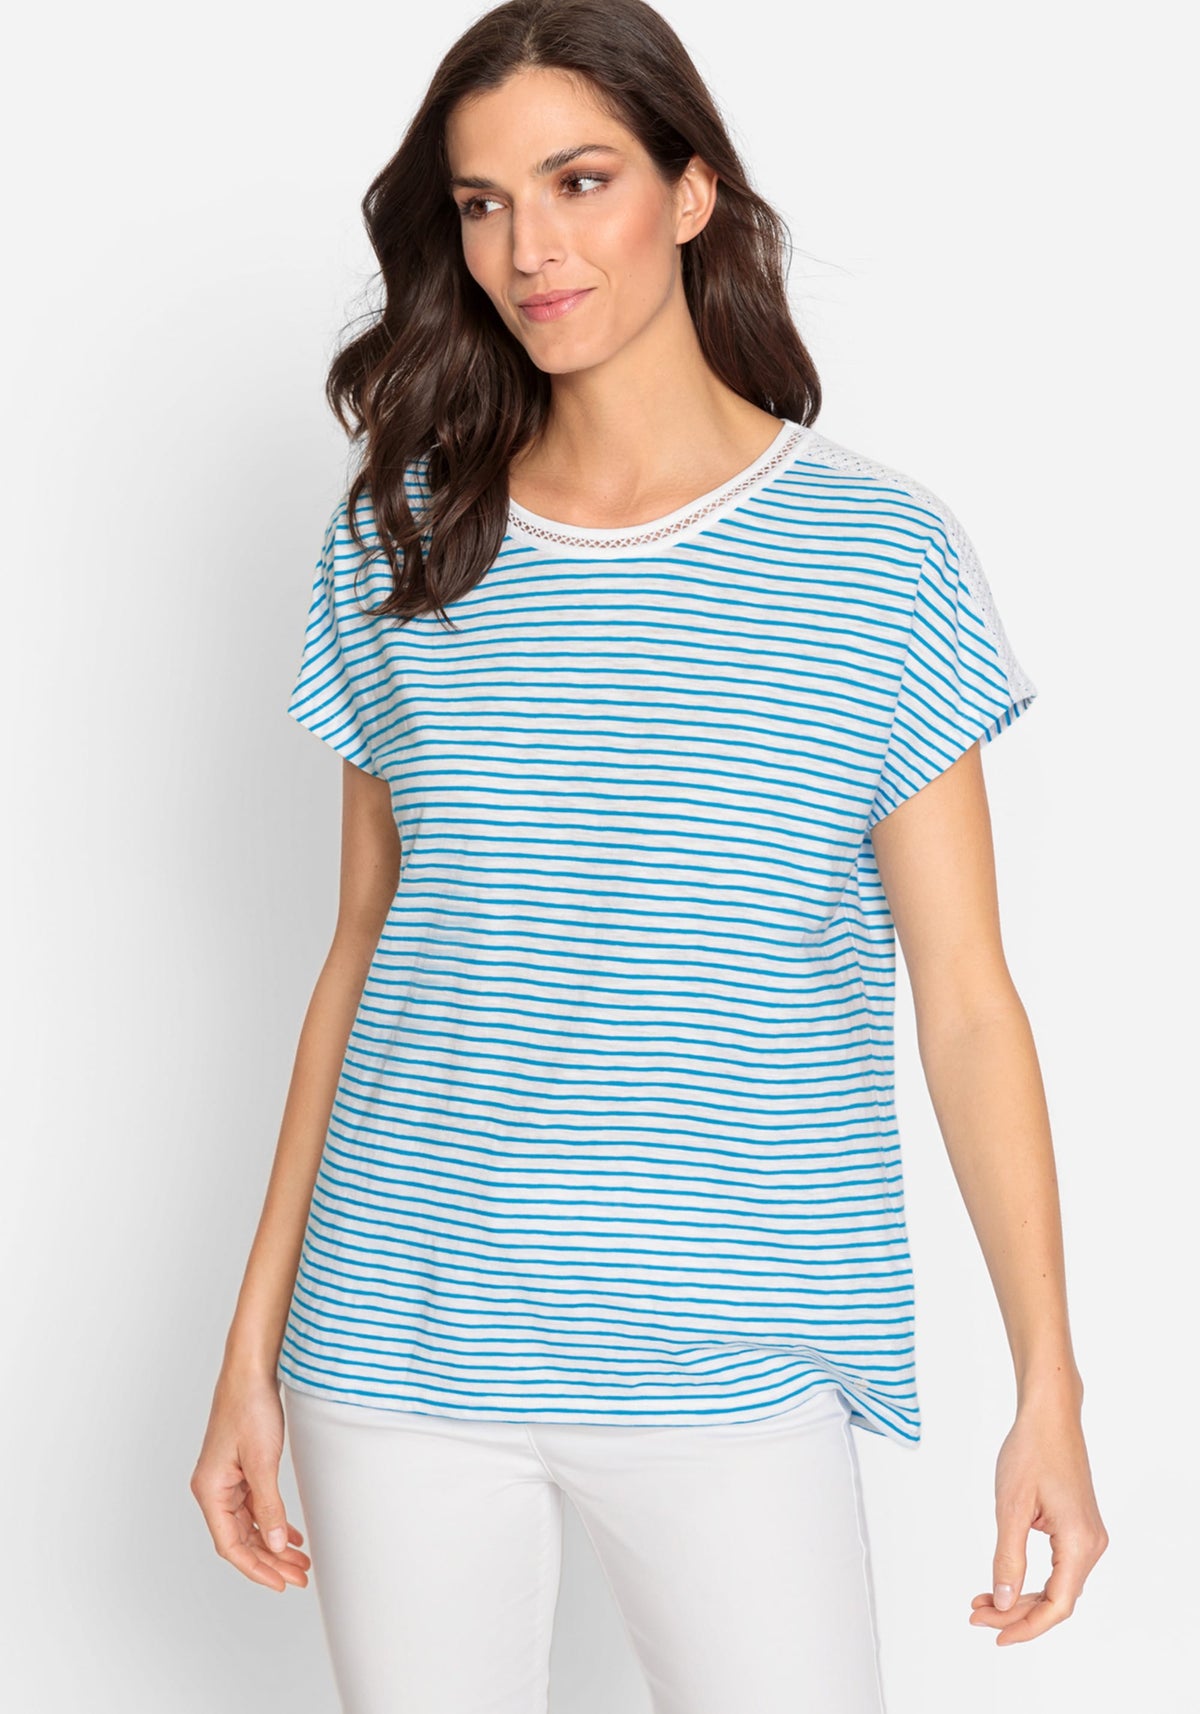 100% Cotton Short Sleeve Striped Tee with Lace Trim